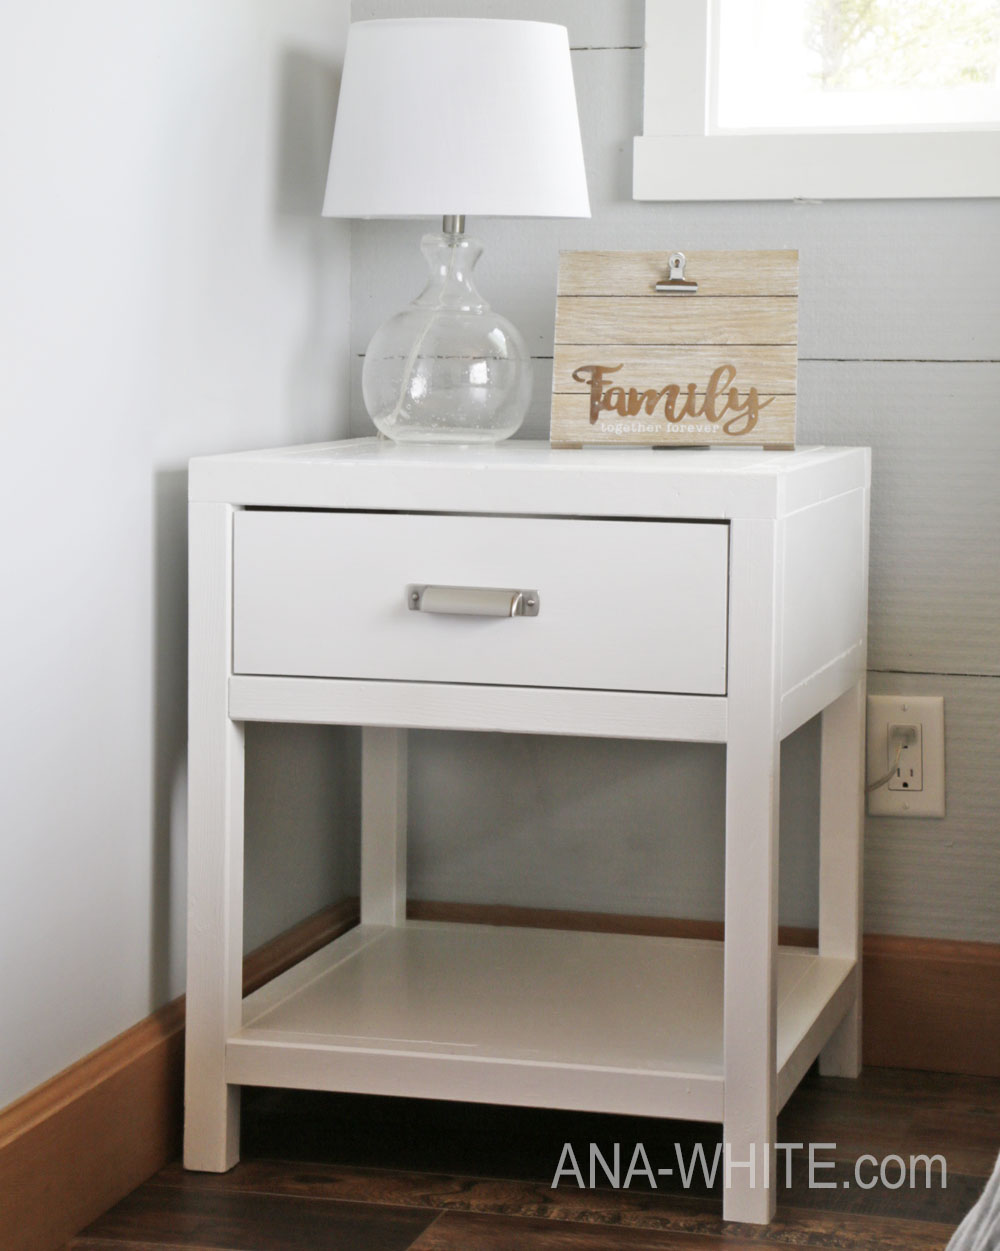 ana white simple modern bedside table diy projects nightstand plans accent with power strip glass and brass cocktail tables pottery barn trestle yard chairs bedroom chair teal